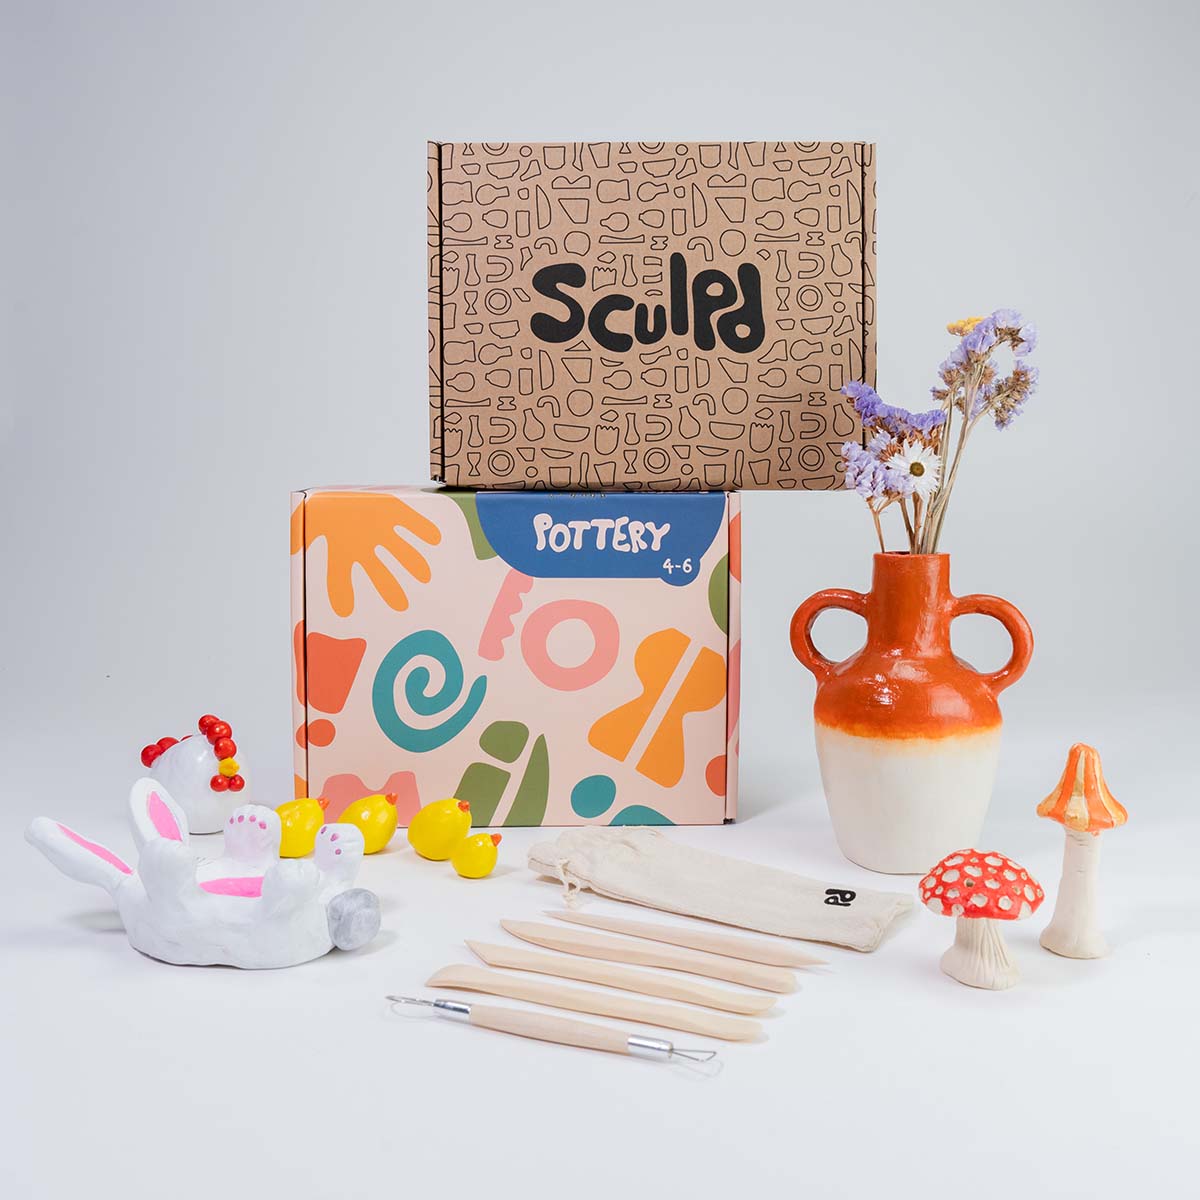 Sculpd Pottery Kit  Pottery kit, Pottery crafts, Clay art projects